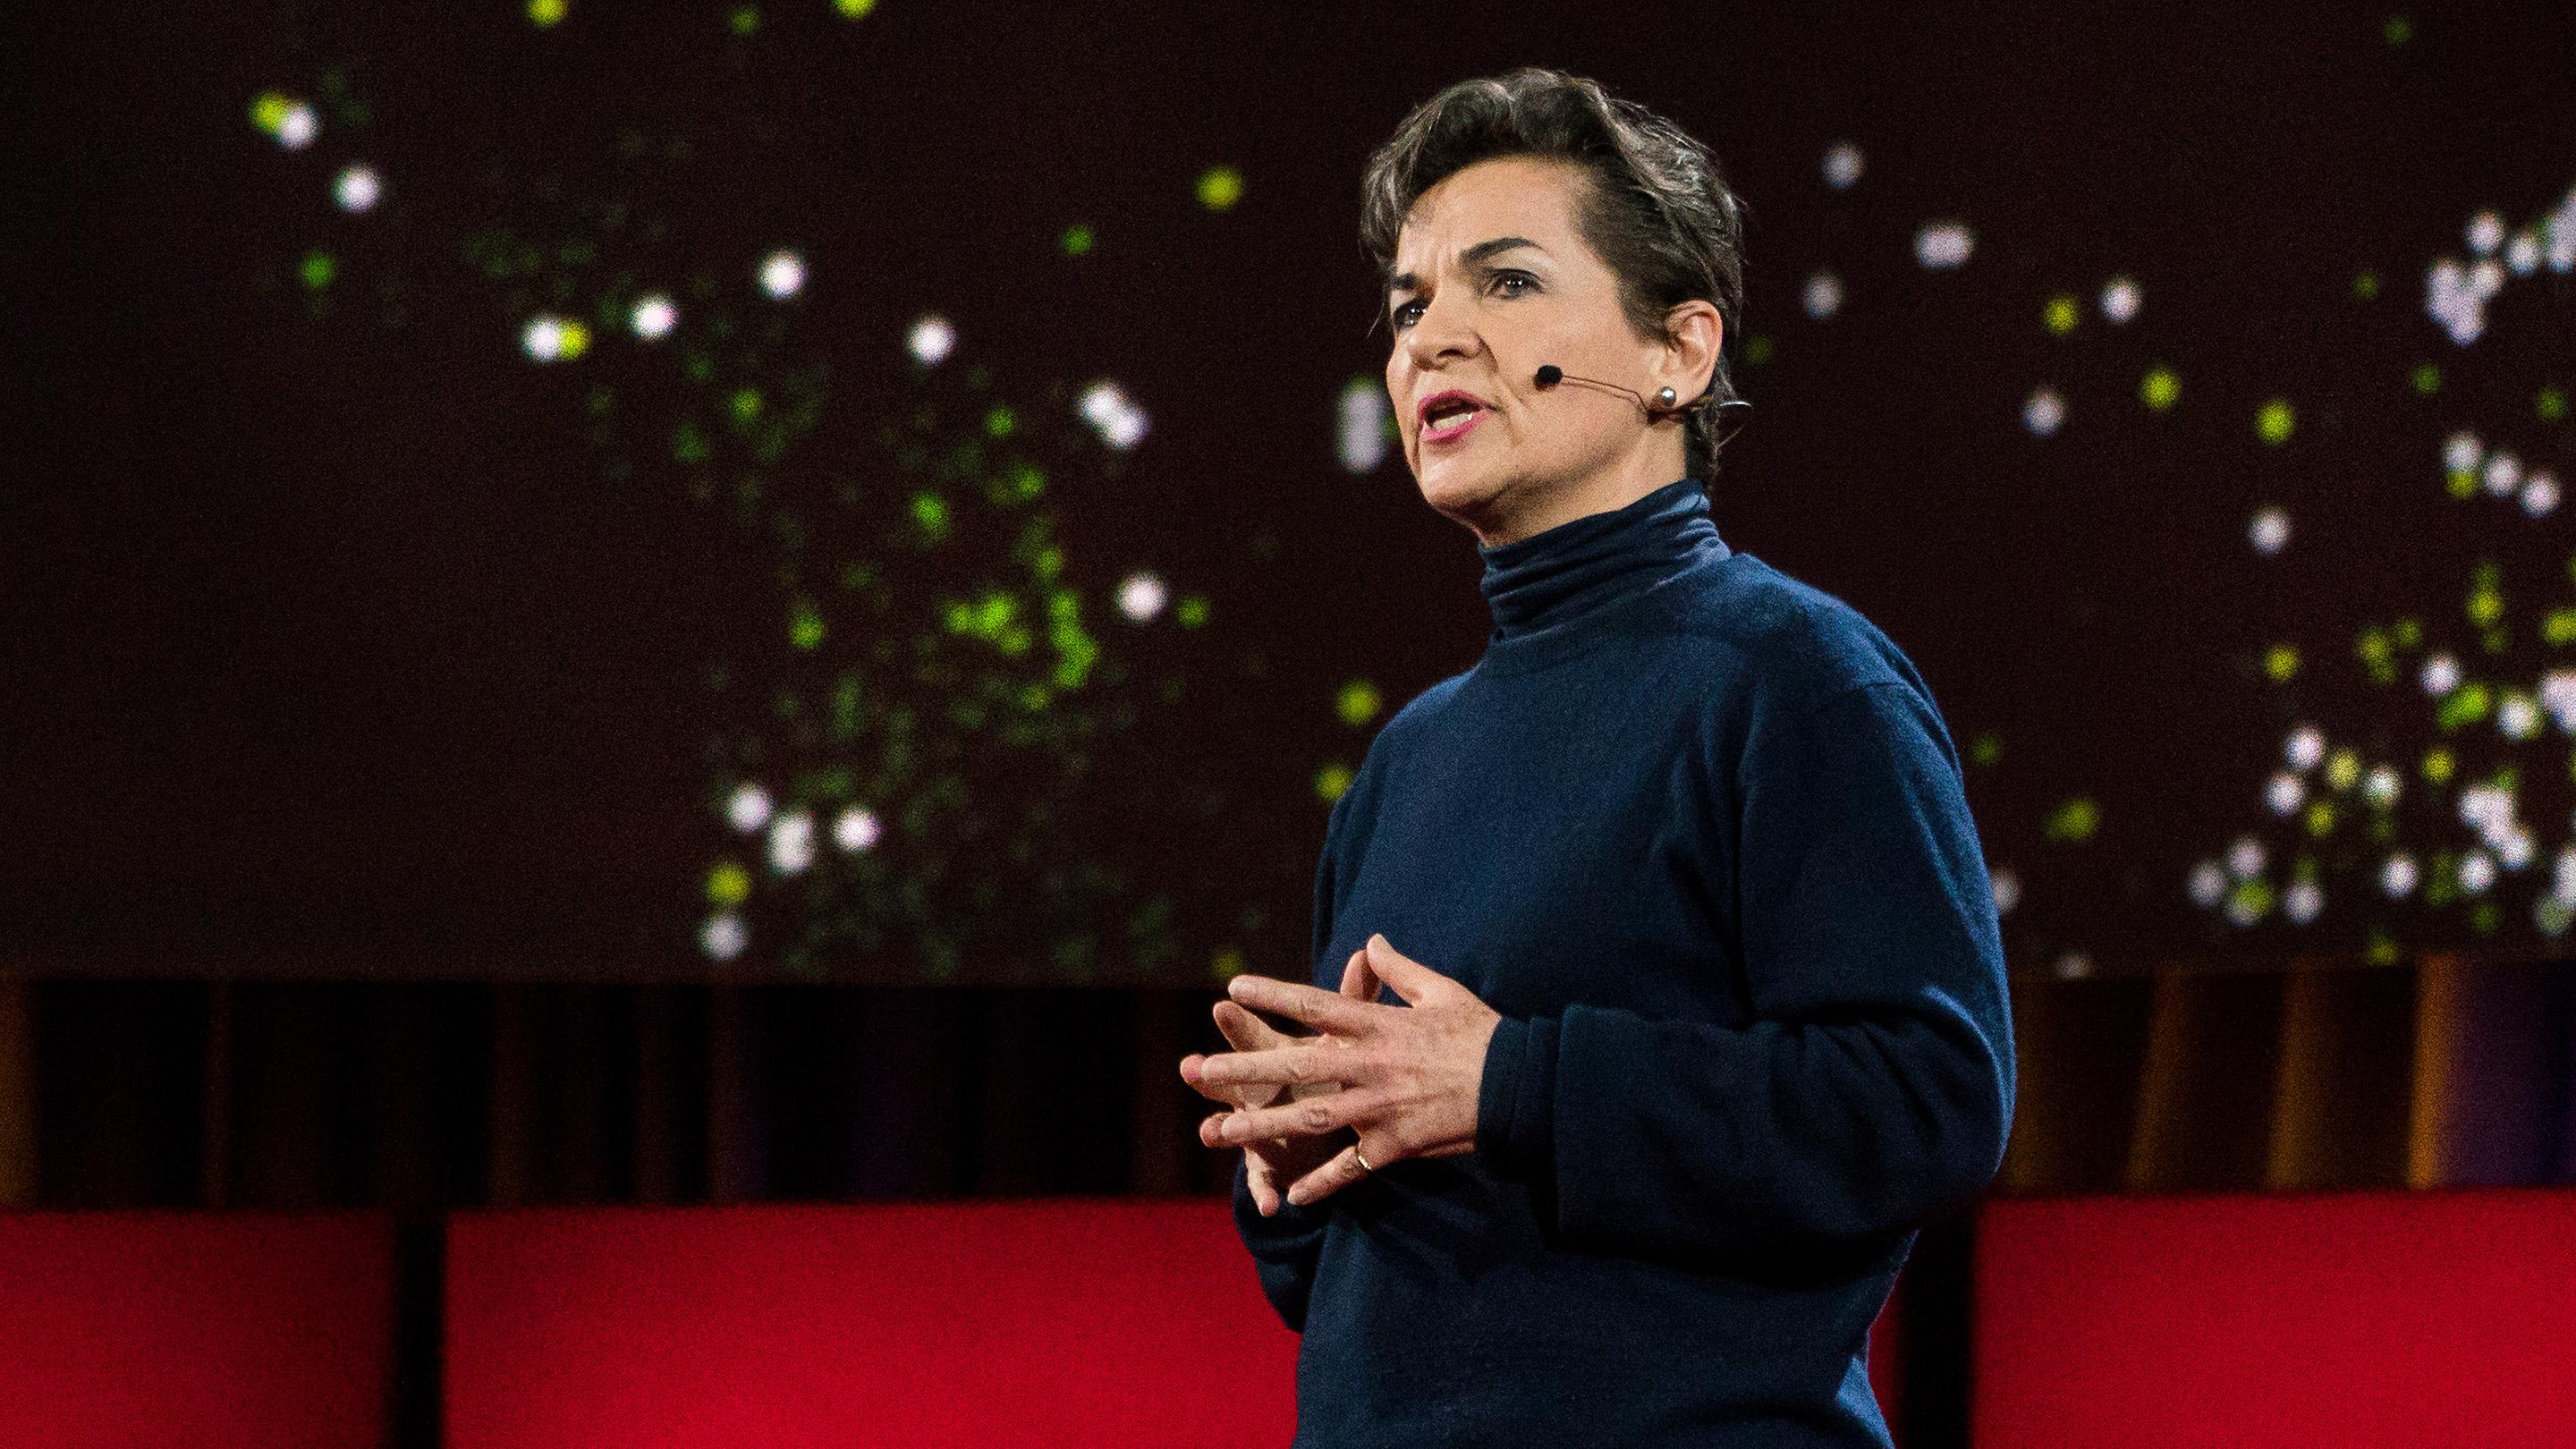 10 years after Al Gore gave his eye-opening TED Talk about global warming, the UN's Christiana Figueres described the first global effort to fight it. Photo: Bret Hartman